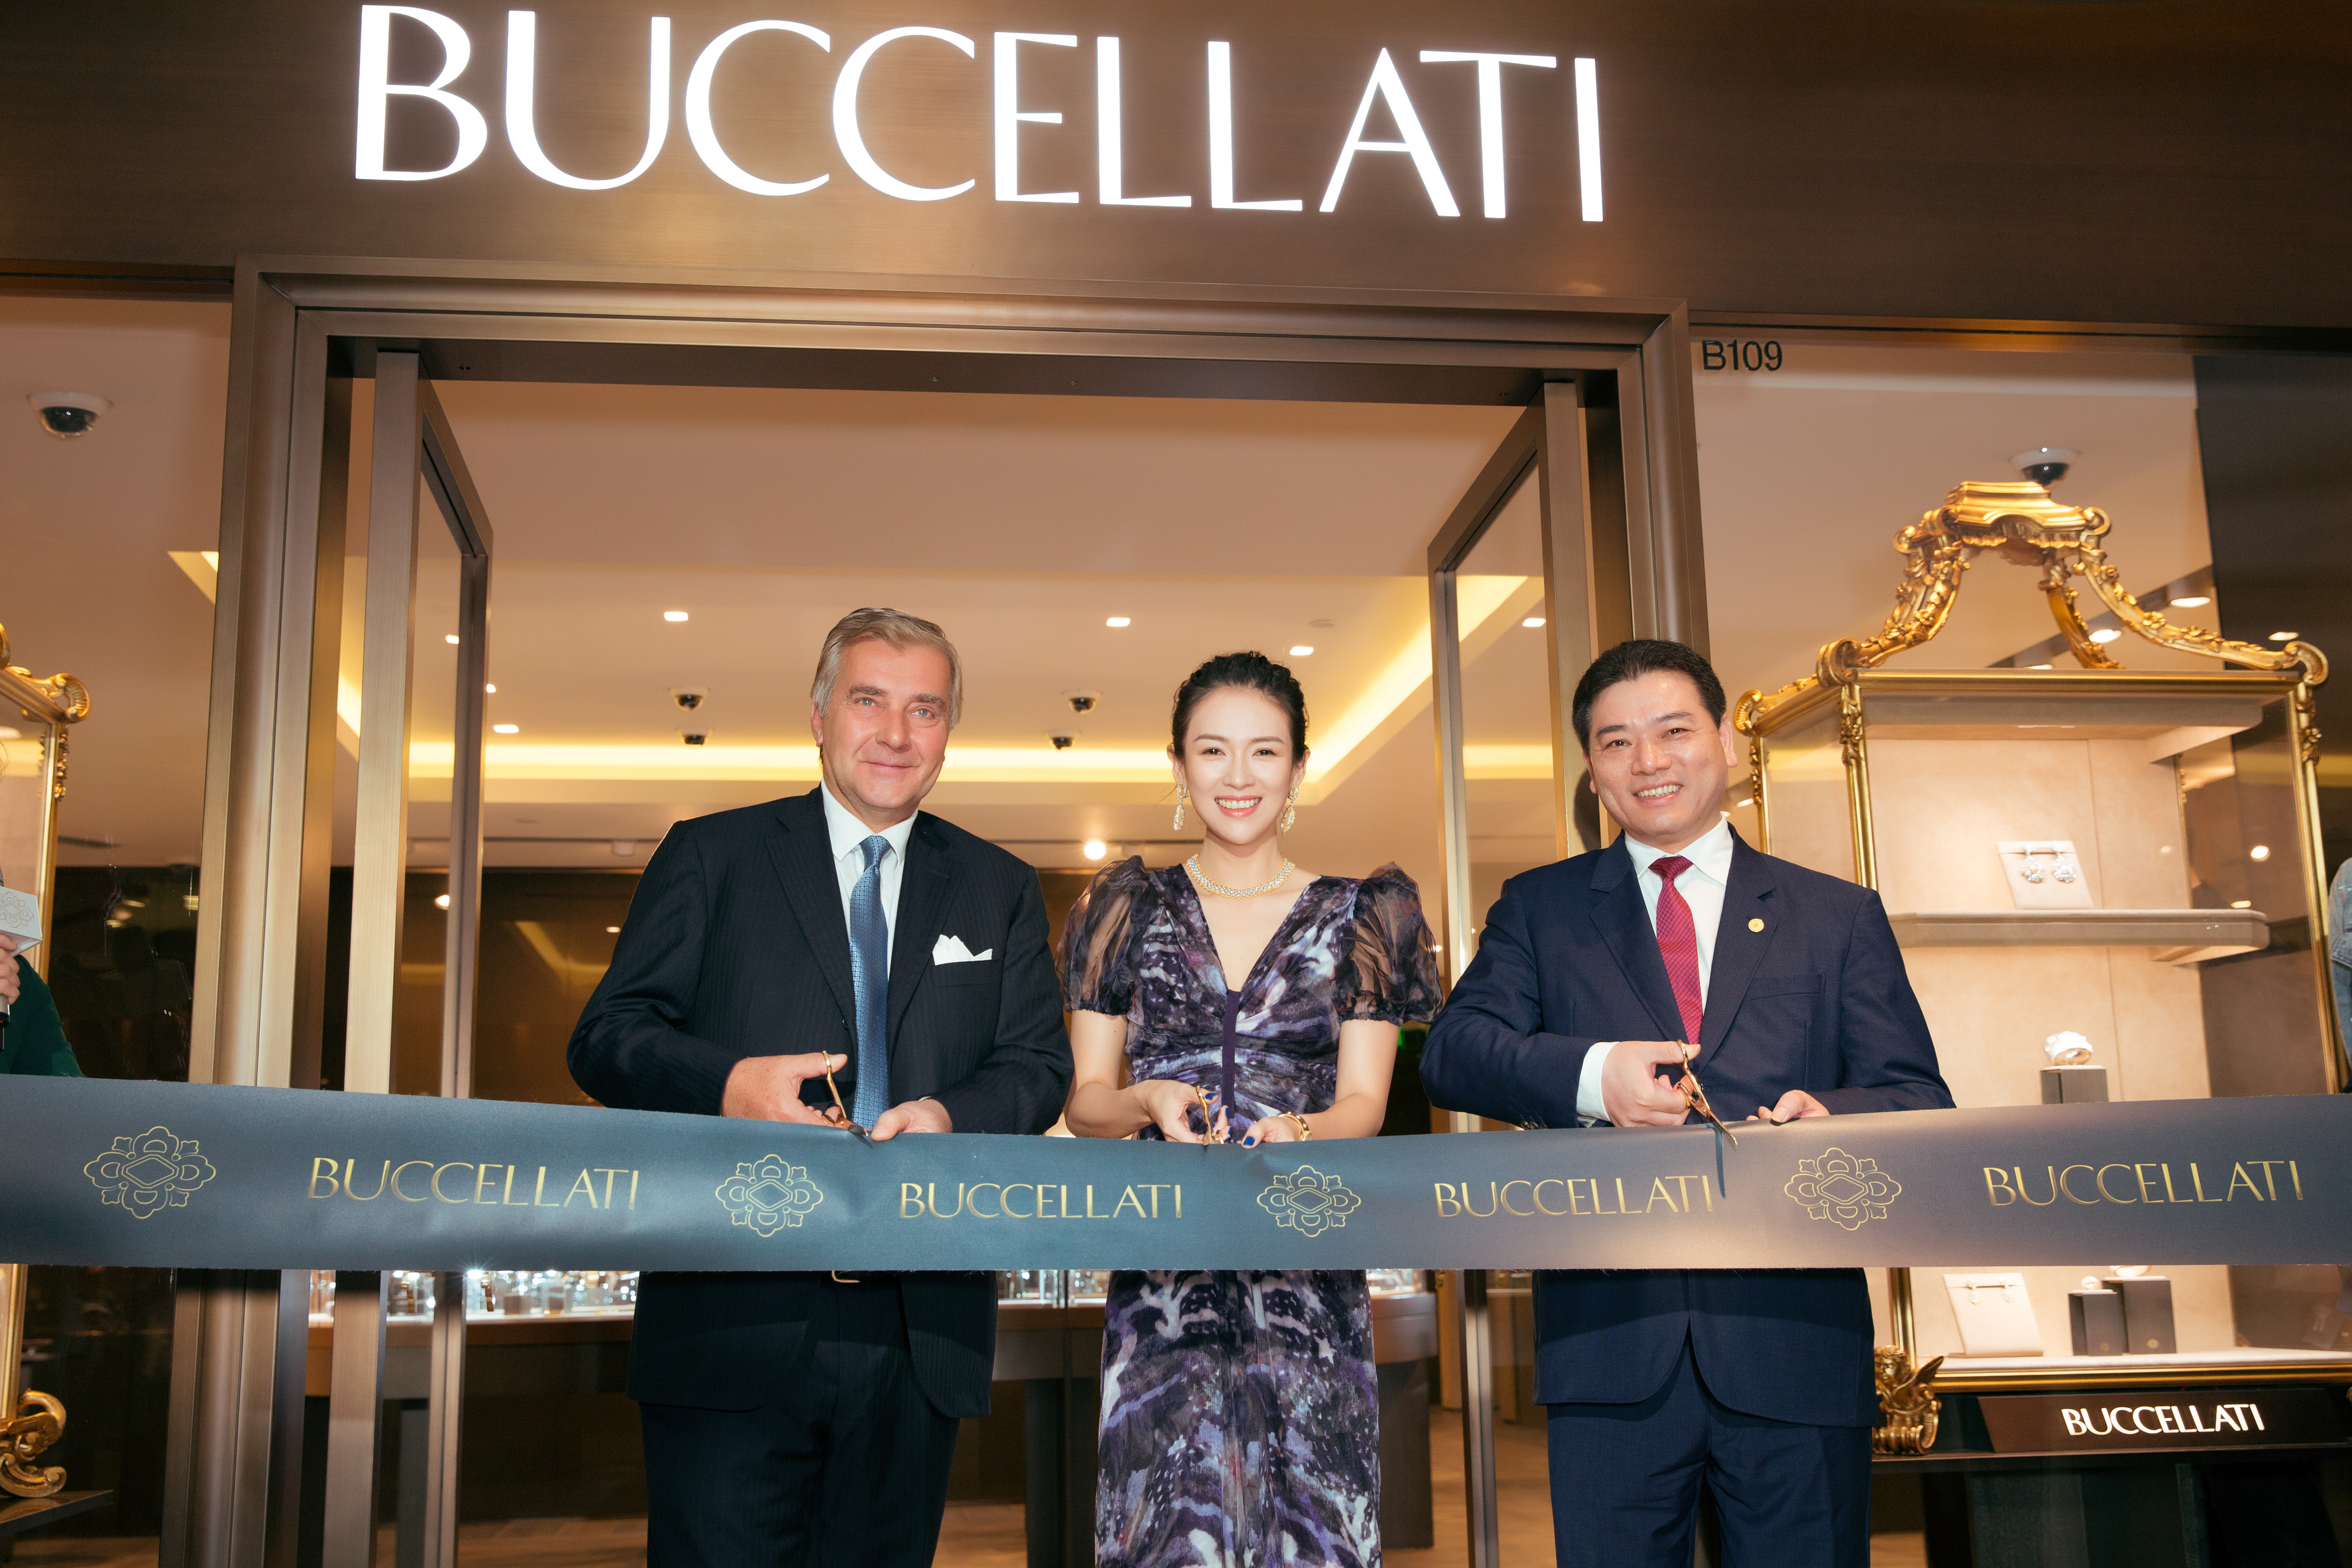 Buccellati launches 'One of a Kind' high-jewellery collection